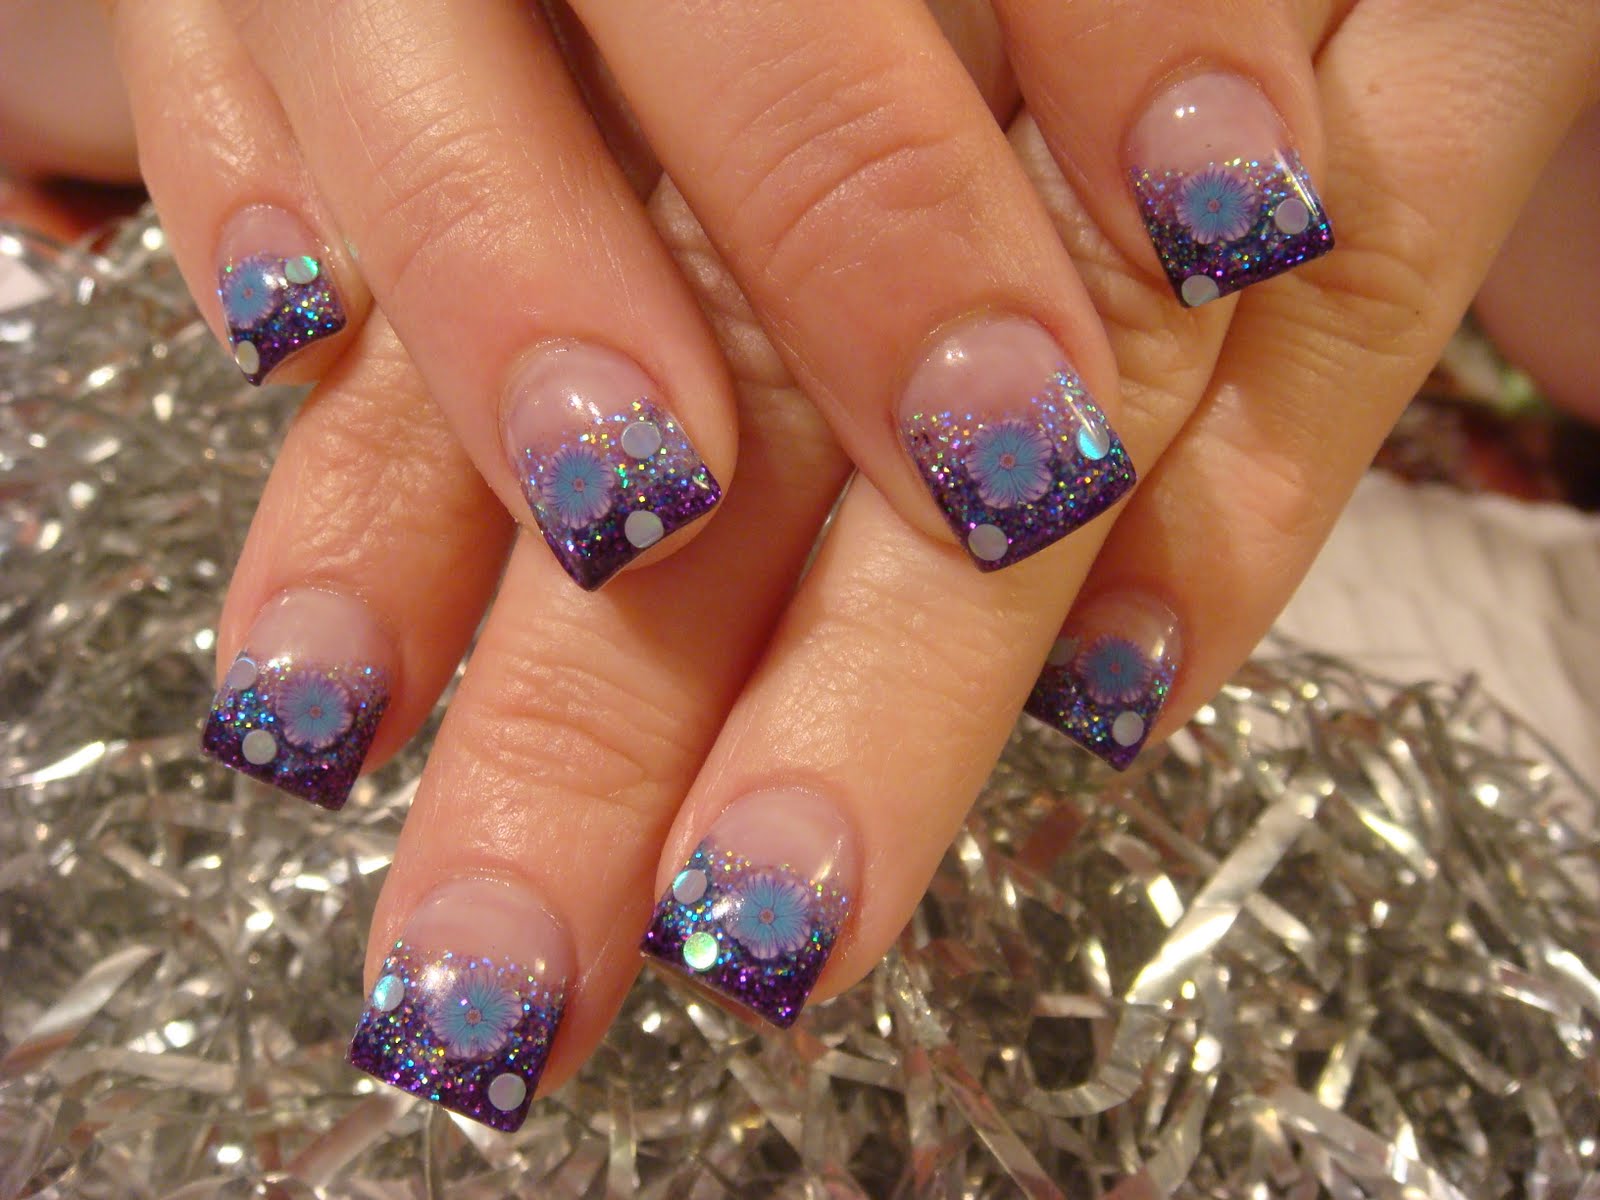 3. Colorful Nail Art - wide 9